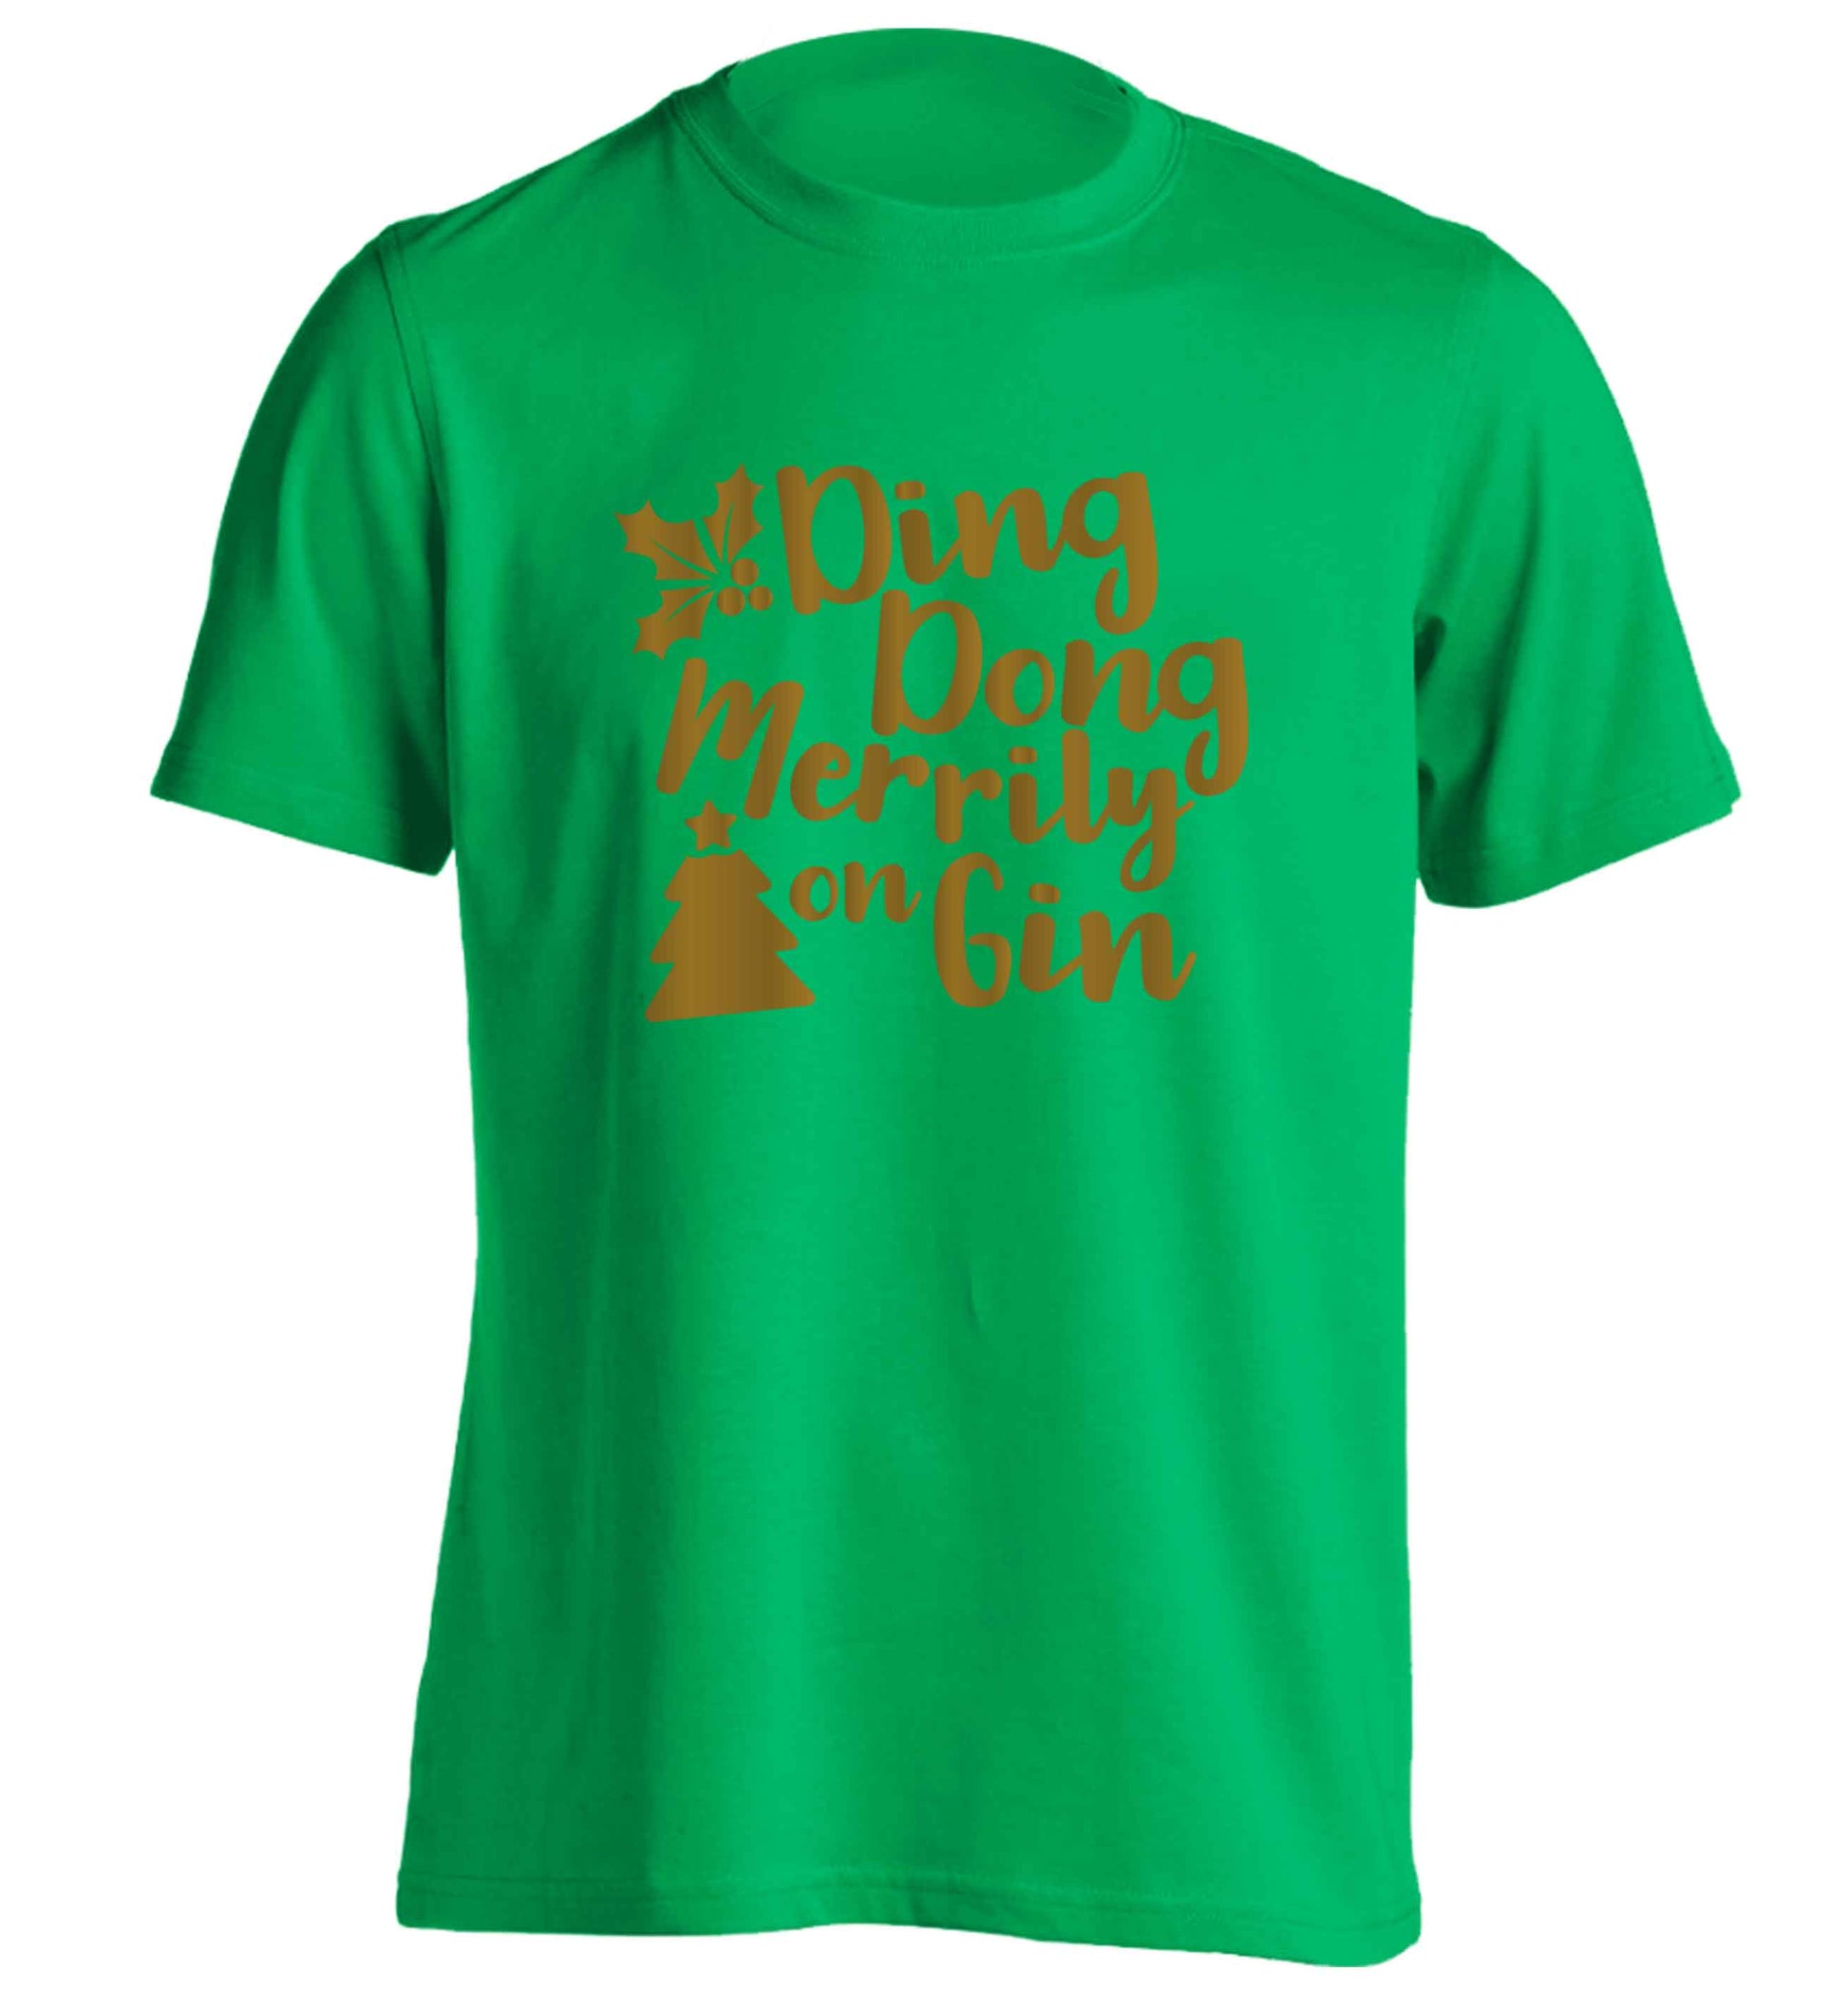 Ding dong merrily on gin adults unisex green Tshirt 2XL